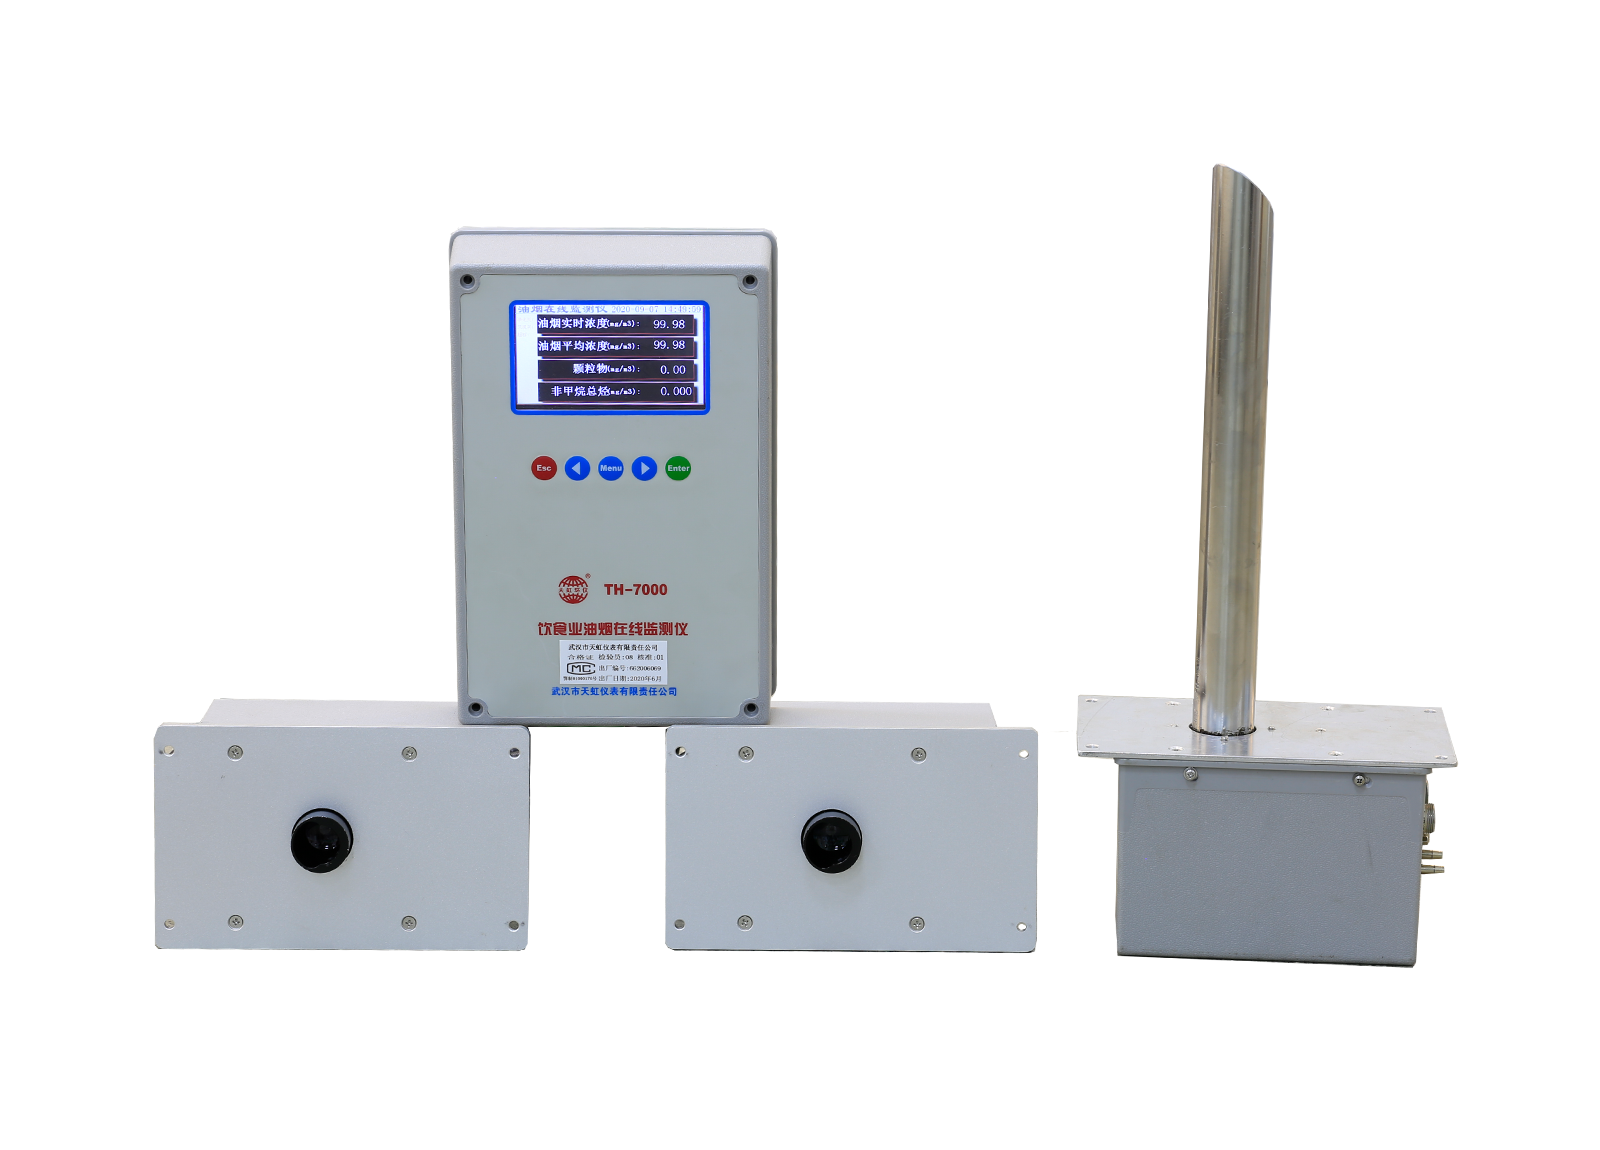 Th-7000 cooking fume online monitor